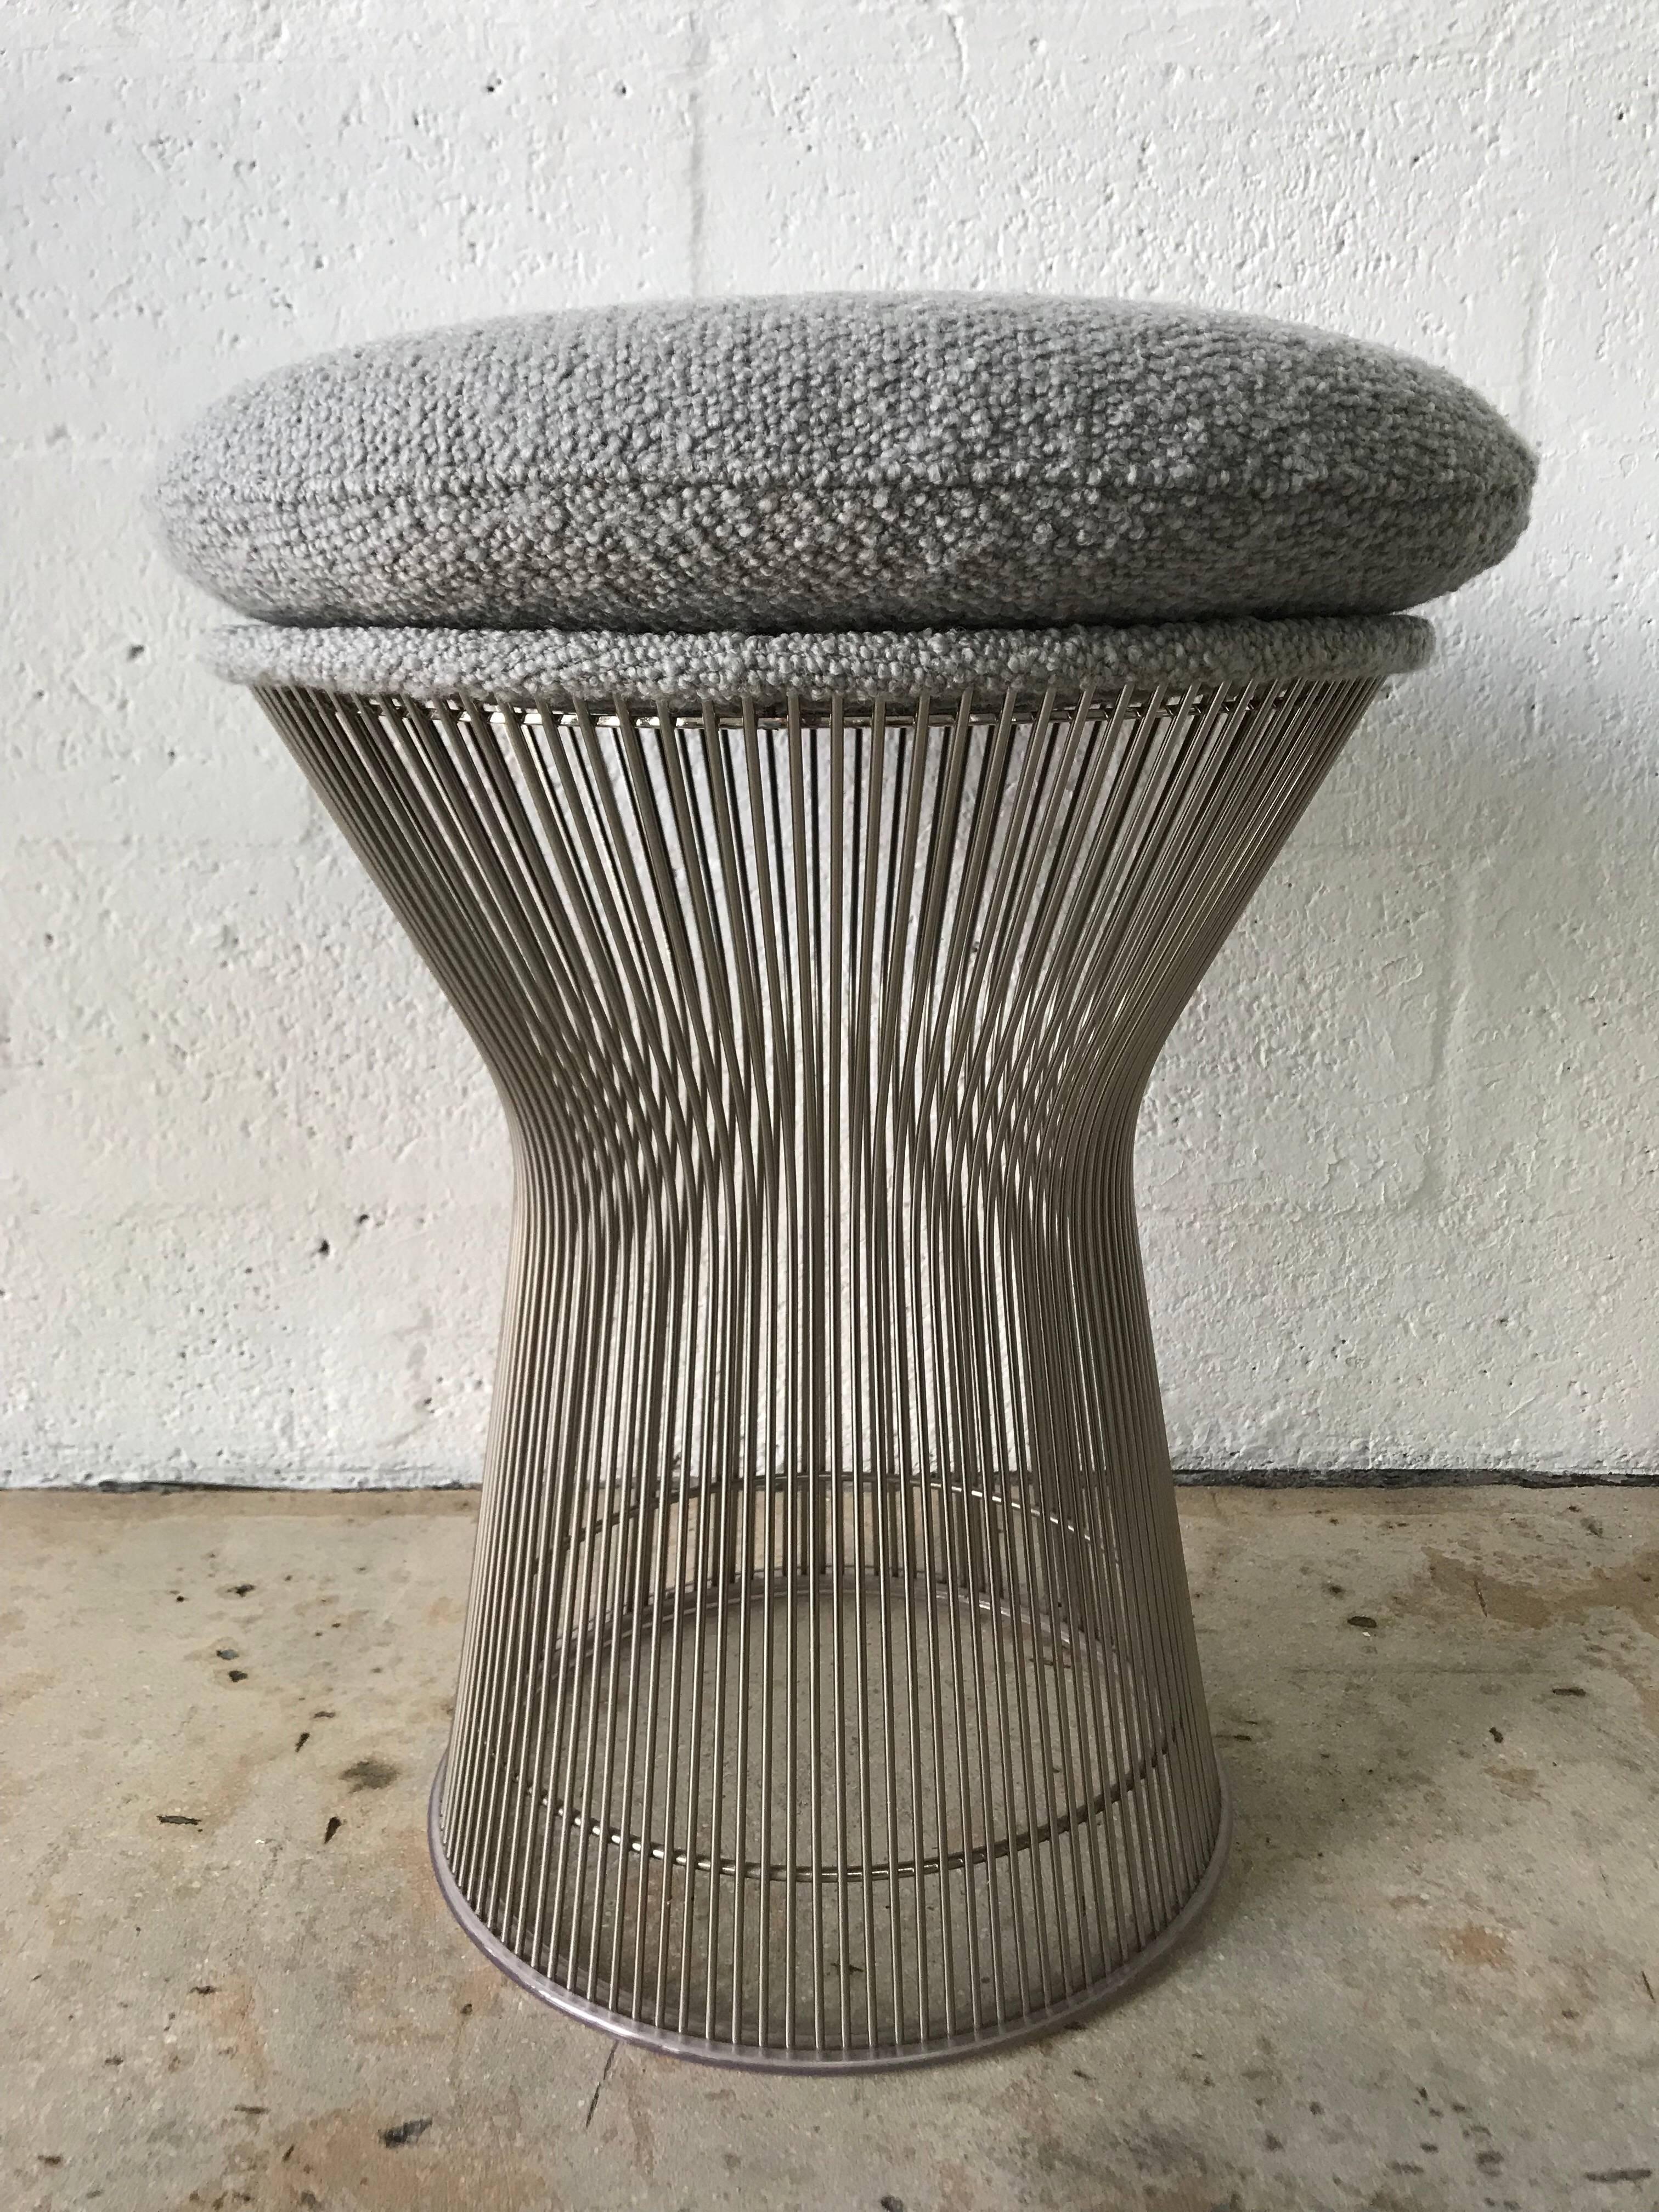 Classic pair of wire stools designed by Warren Platner for Knoll in a grey wool boucle fabric.